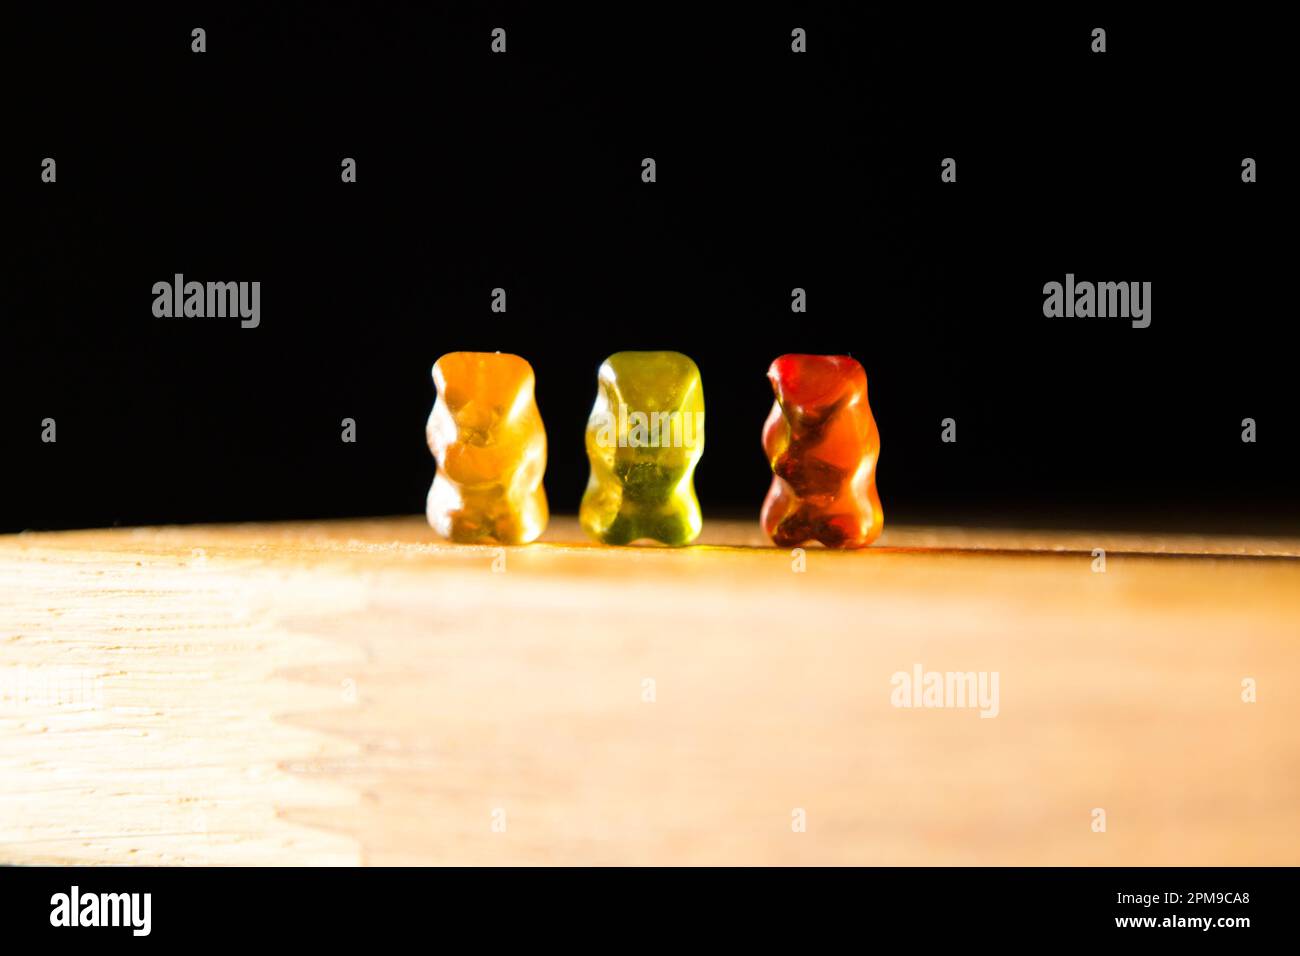 Gummy bears playing on a food table Stock Photo